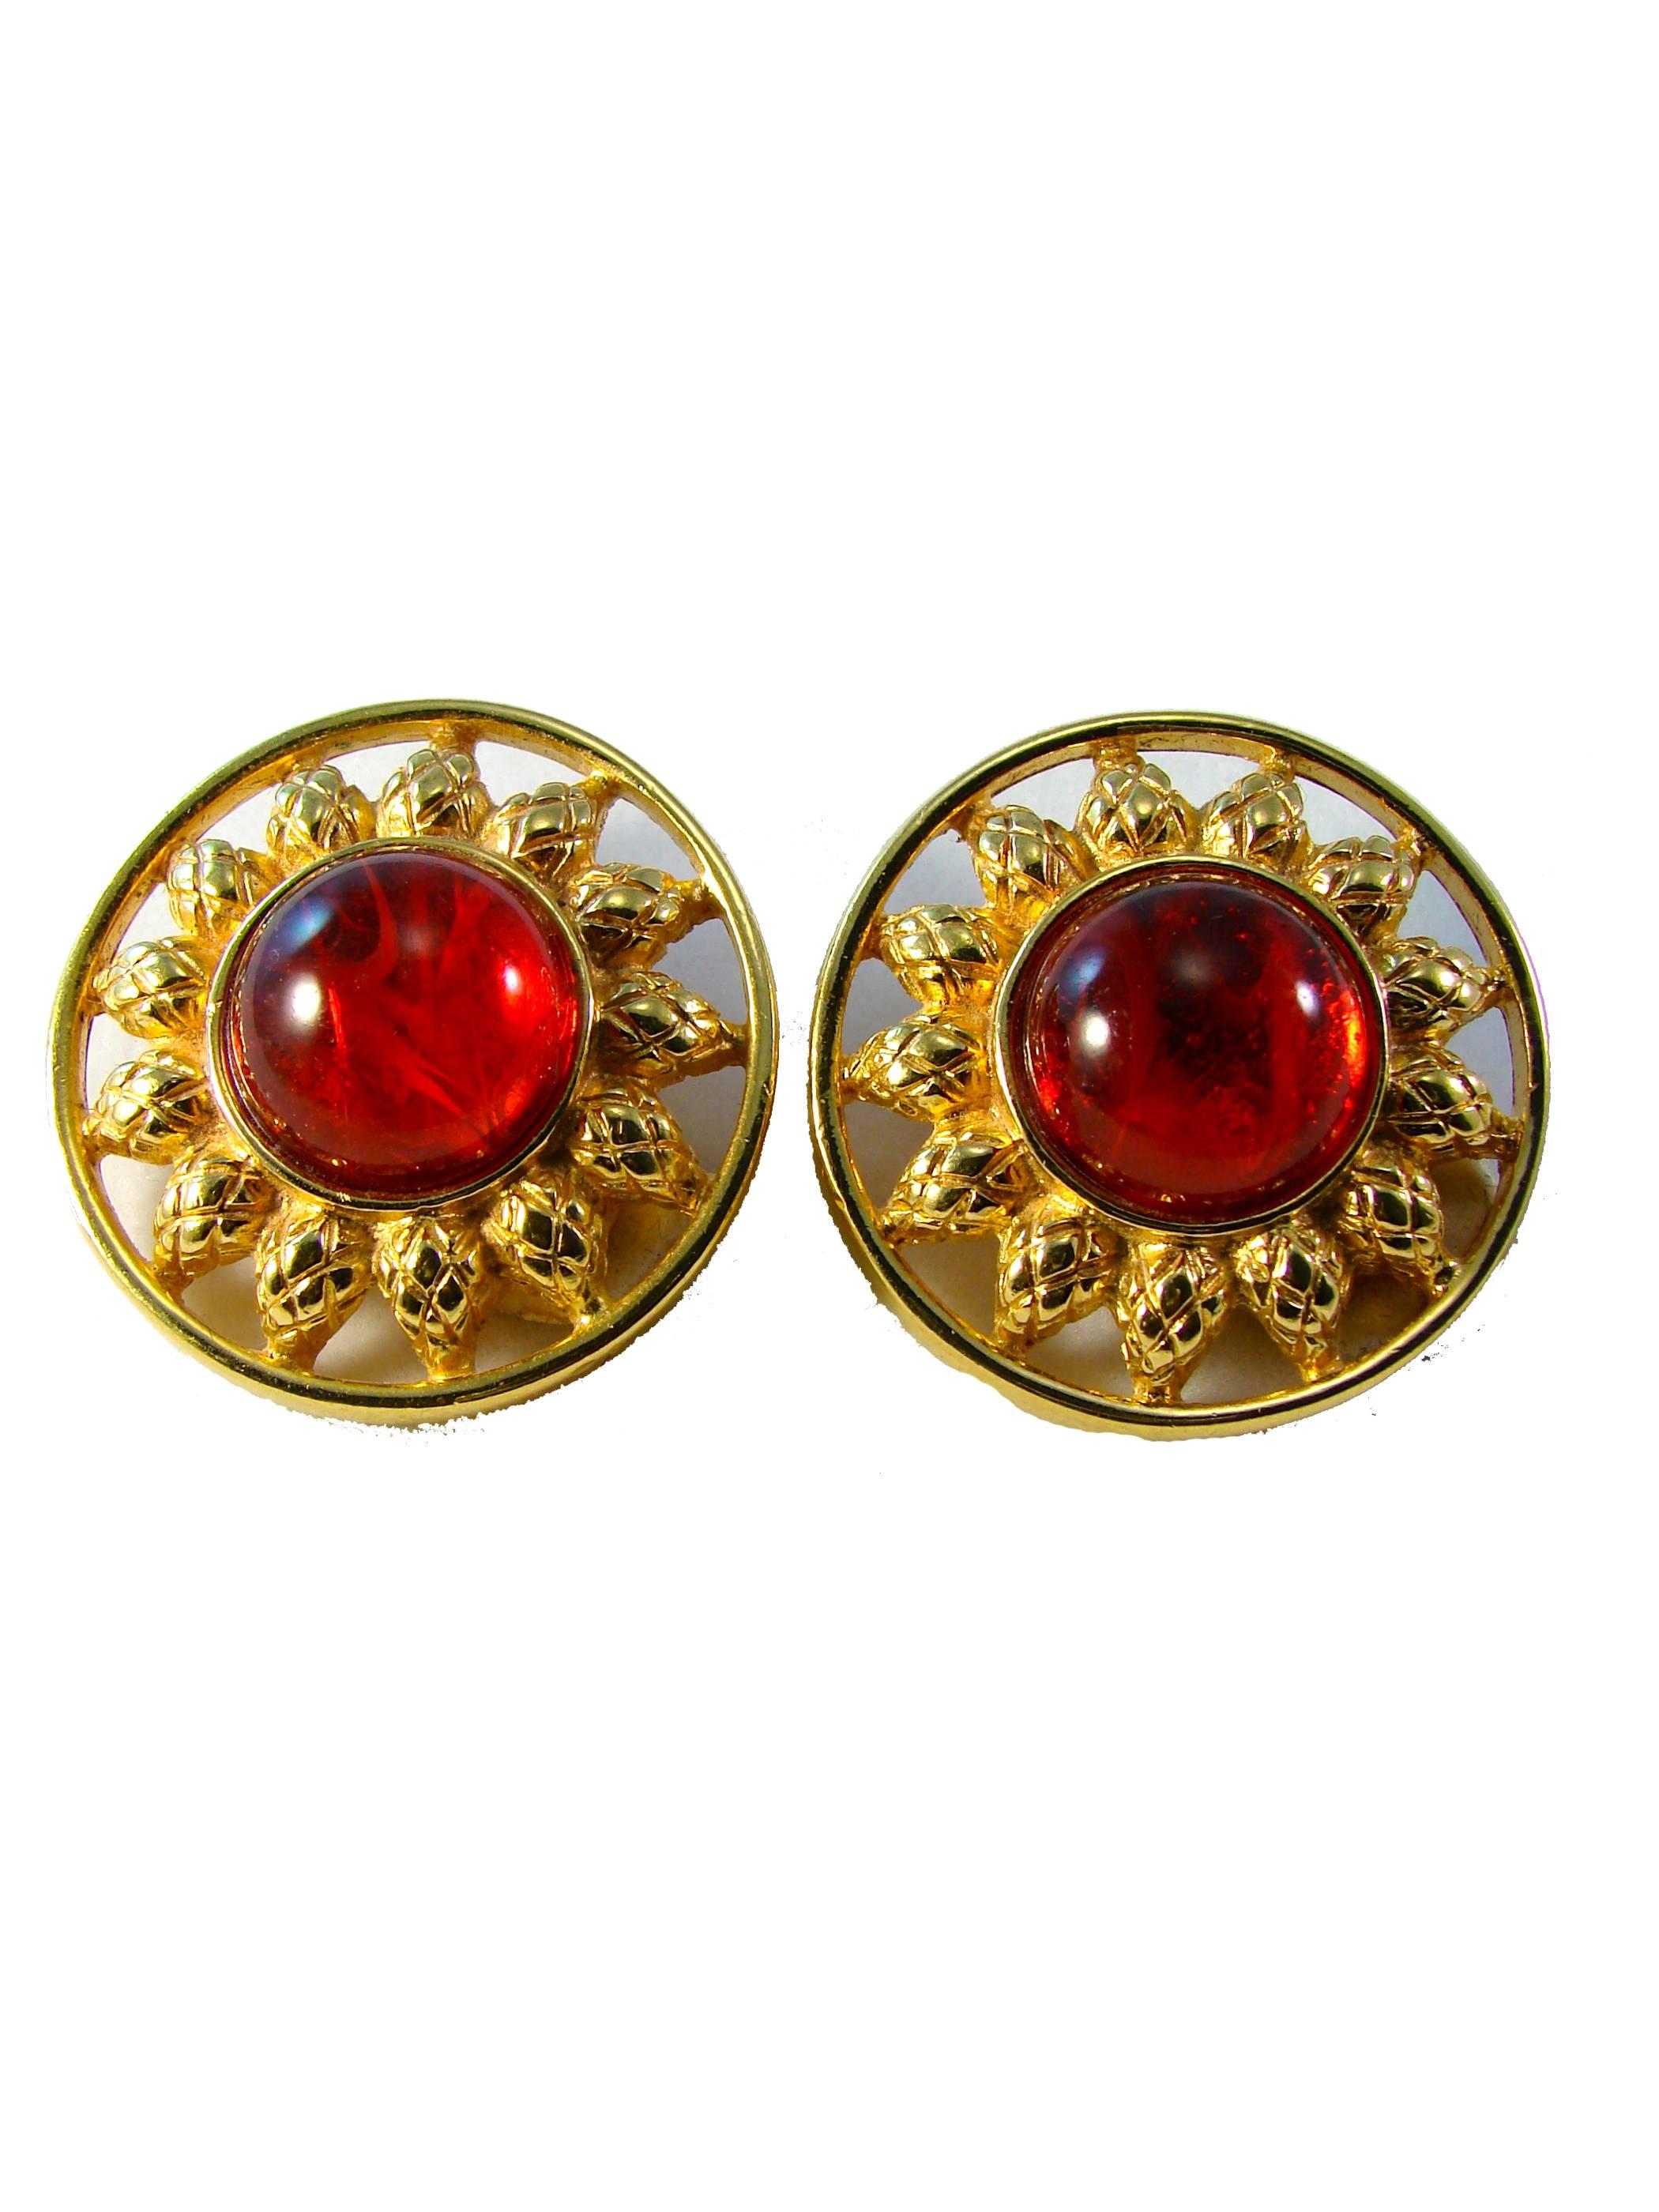 Incredible vintage earrings from Fendi feature a gold metal 